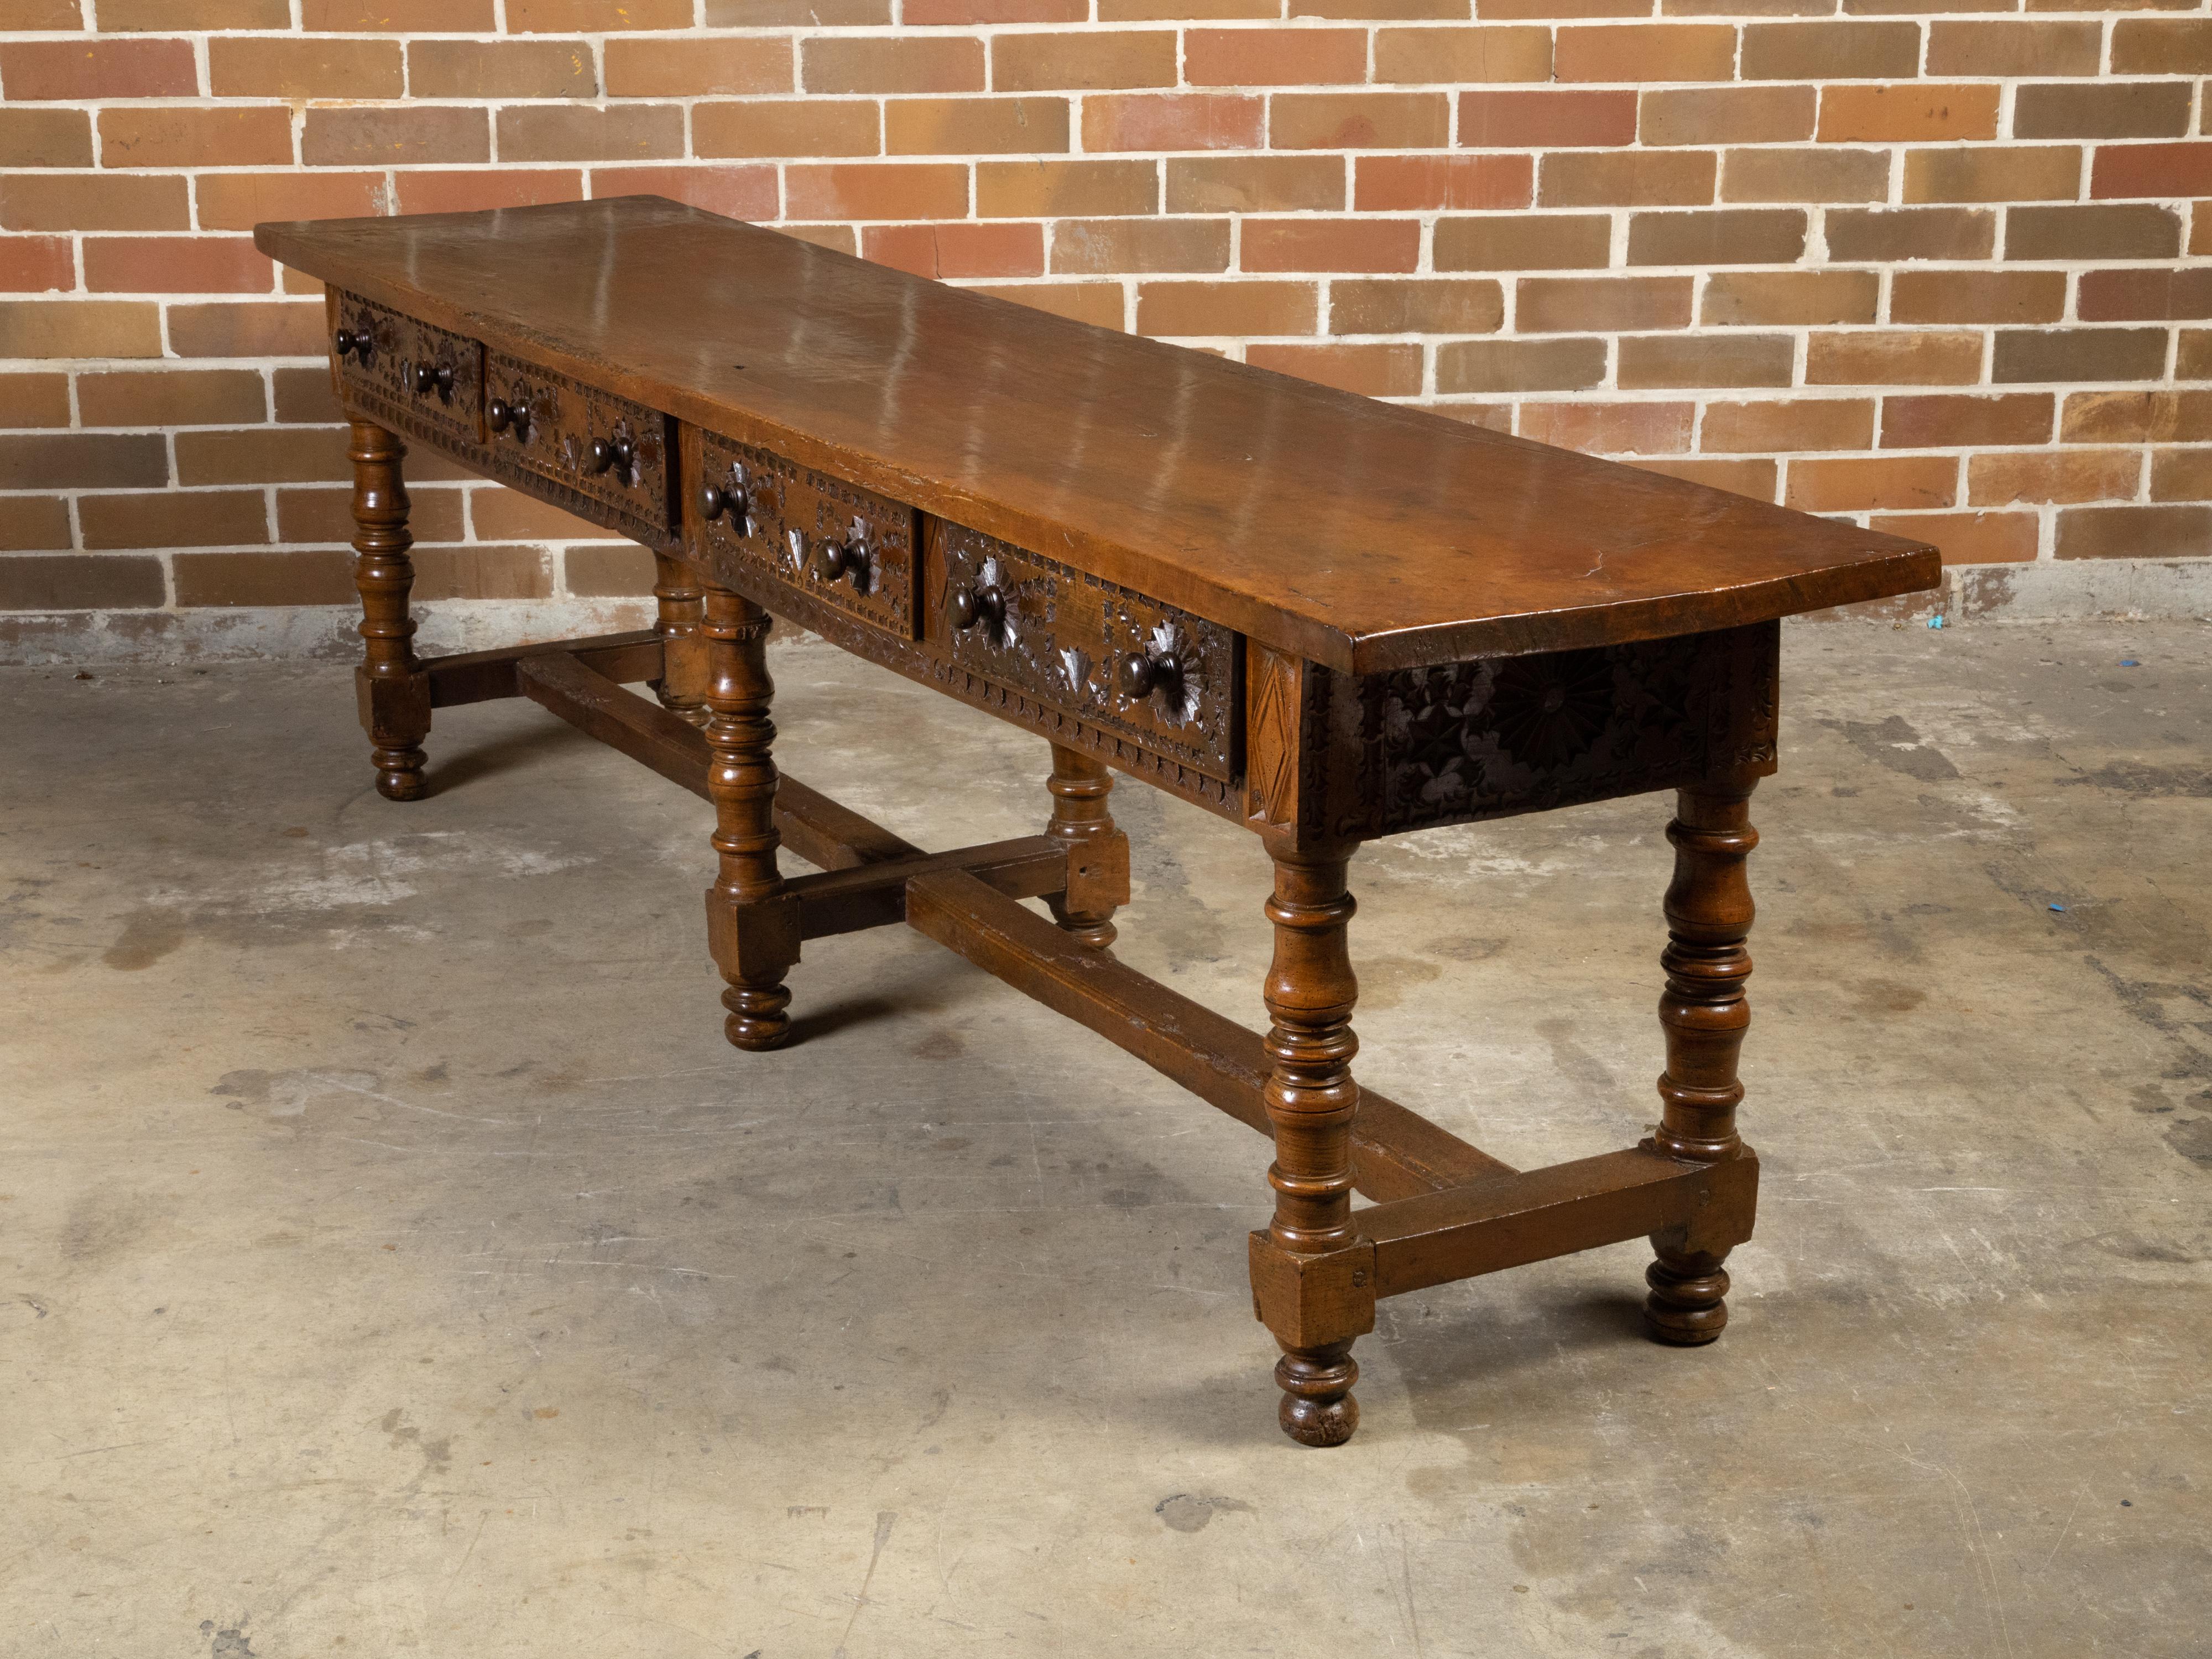 Spanish Colonial 18th Century Walnut Table with Four Richly Carved Drawers For Sale 3